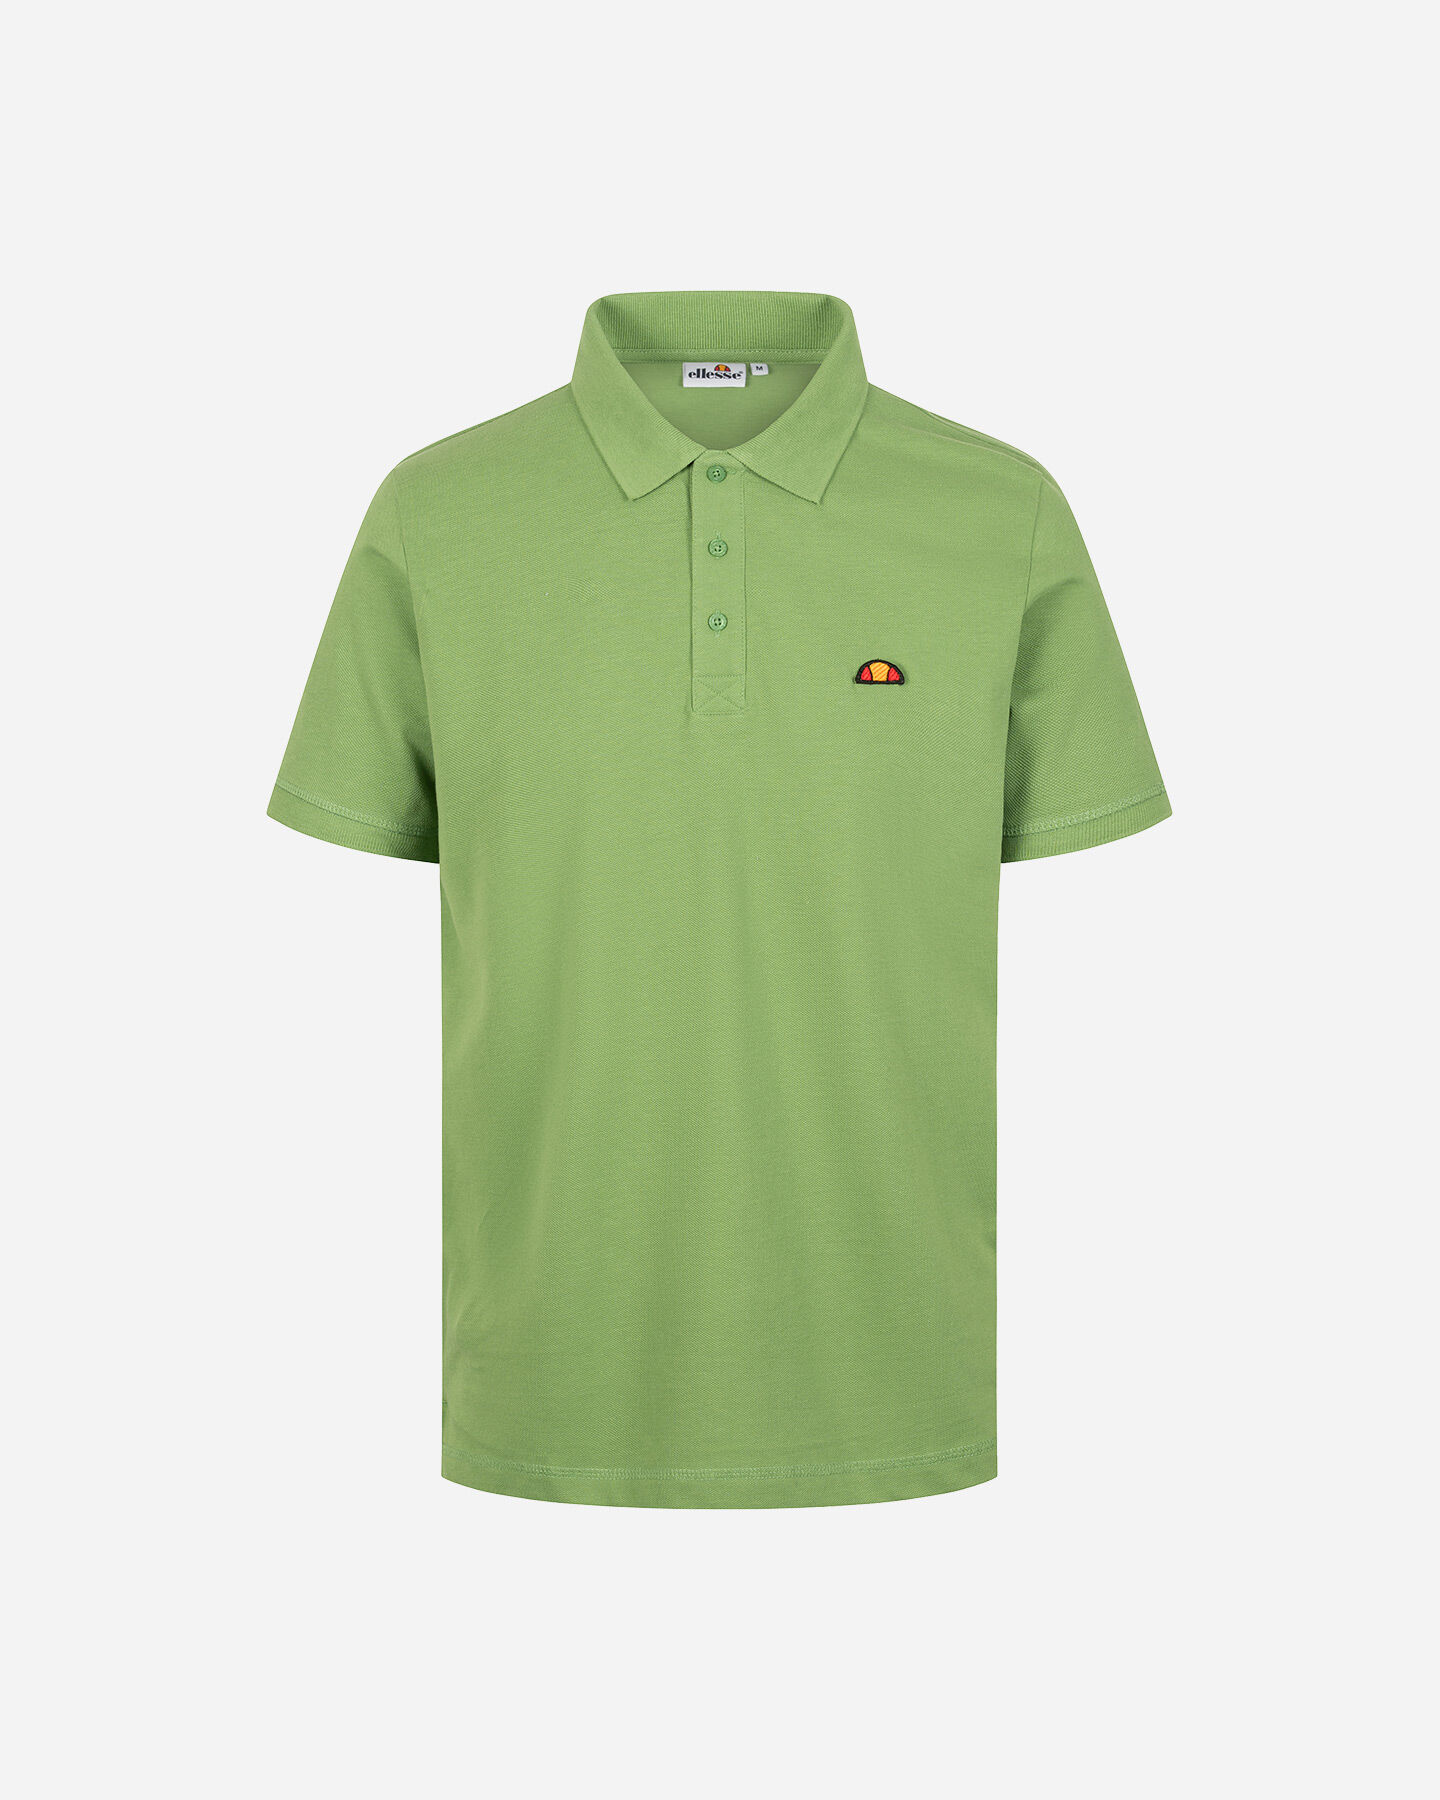  Polo ELLESSE CLASSIC PATCH M S4130185|765|S scatto 5